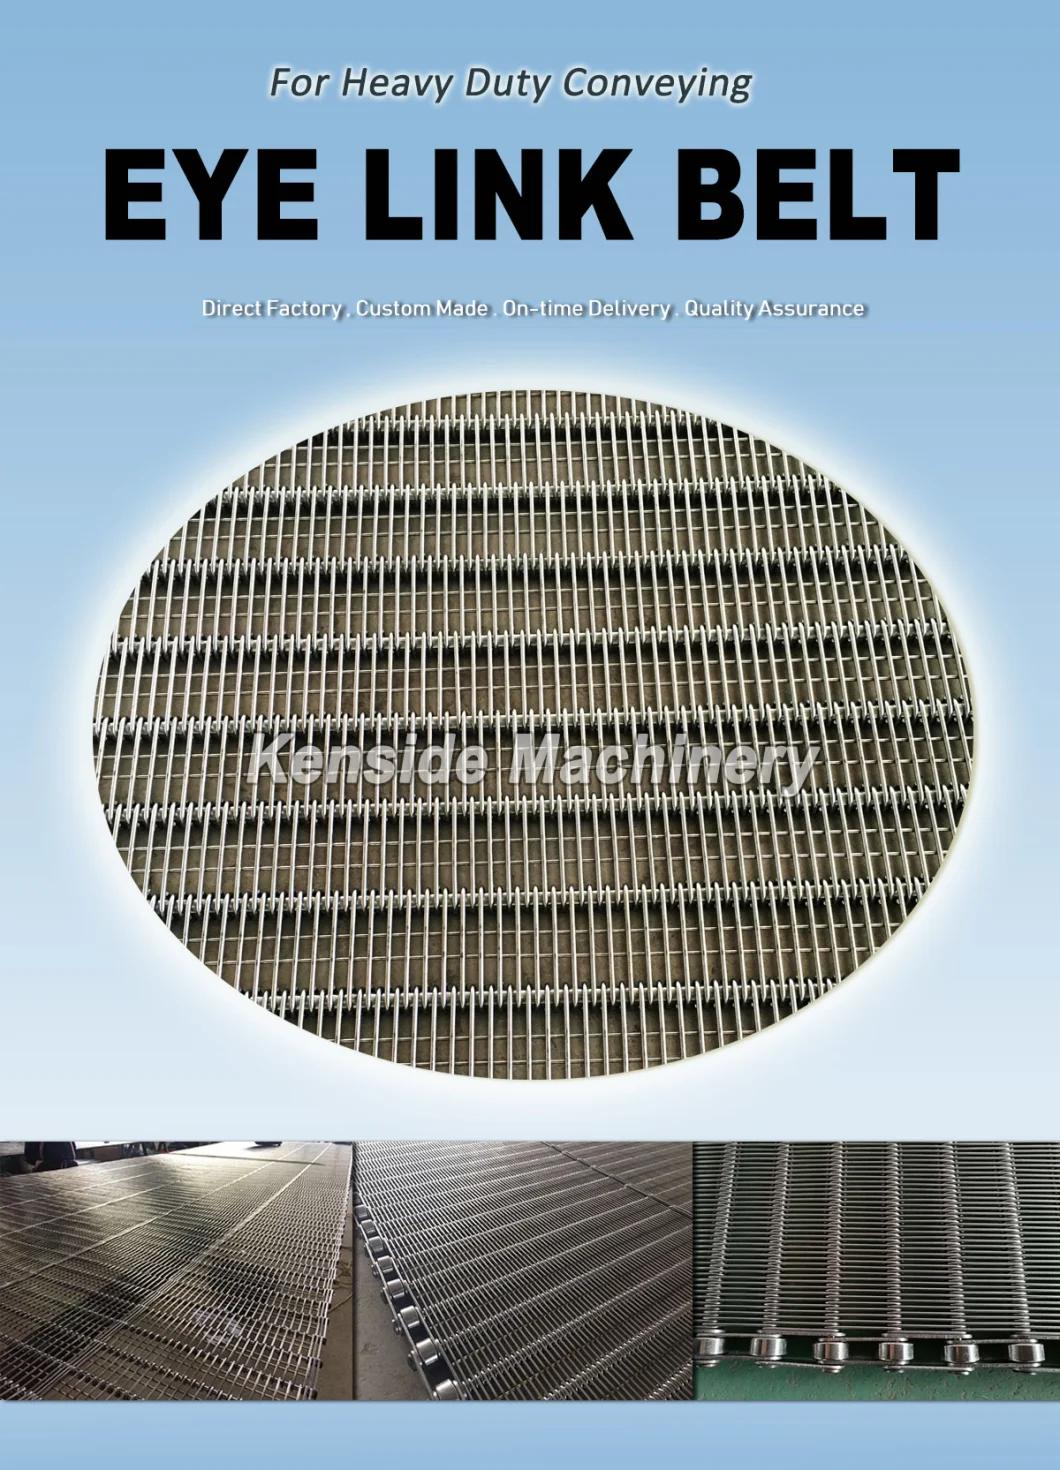 Eye Link Belt for Cooling and Freezing Systems